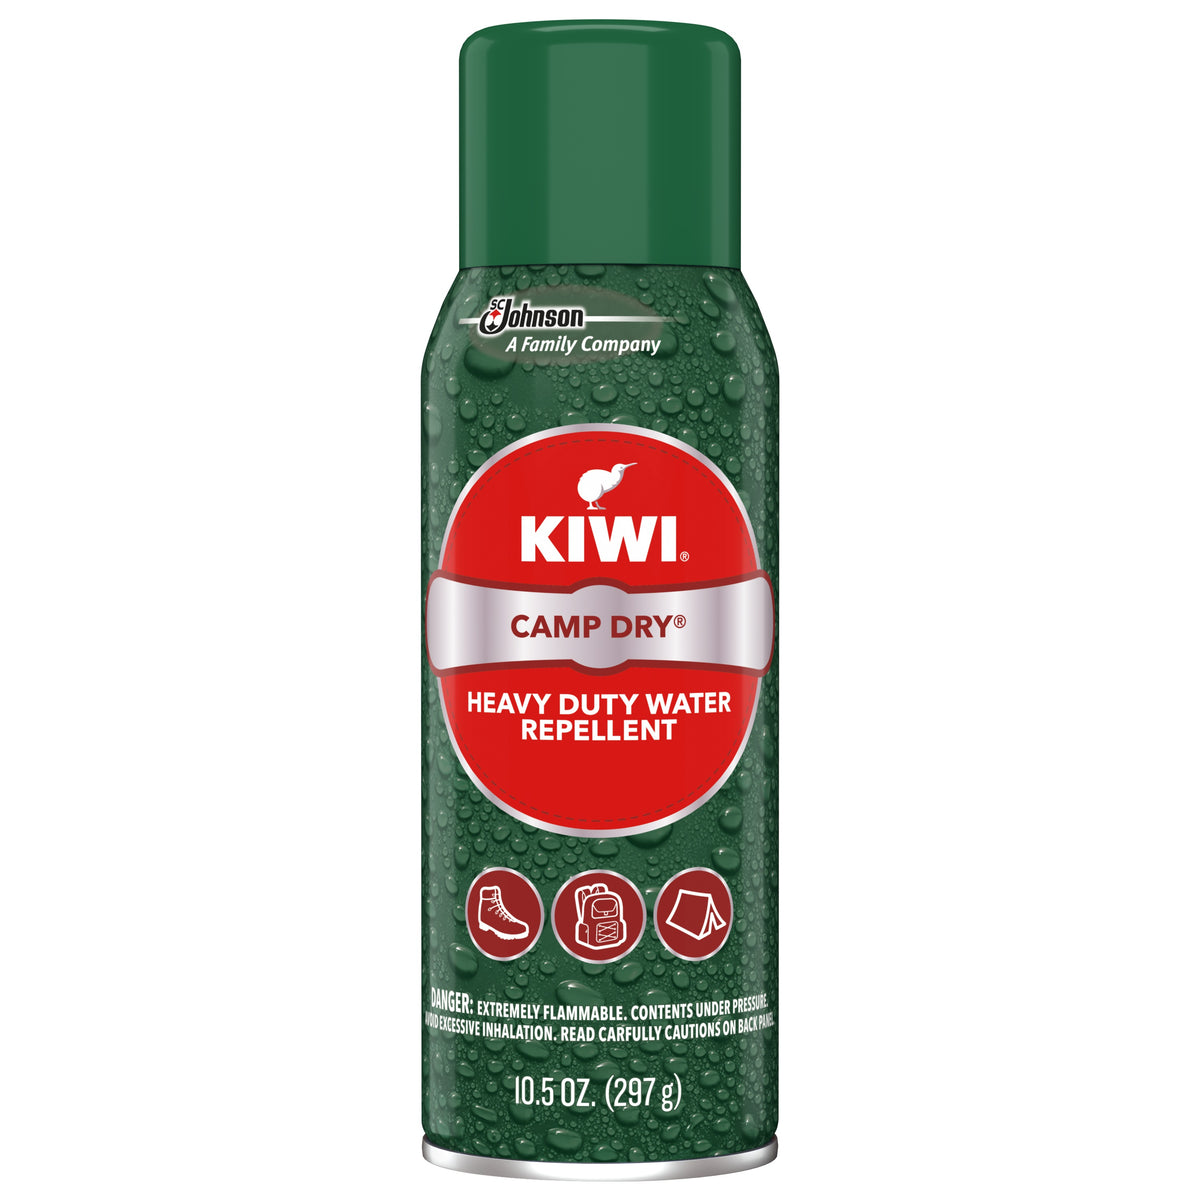 KIWI CAMP DRY WATER REPELLENT GREEN TOP CAN